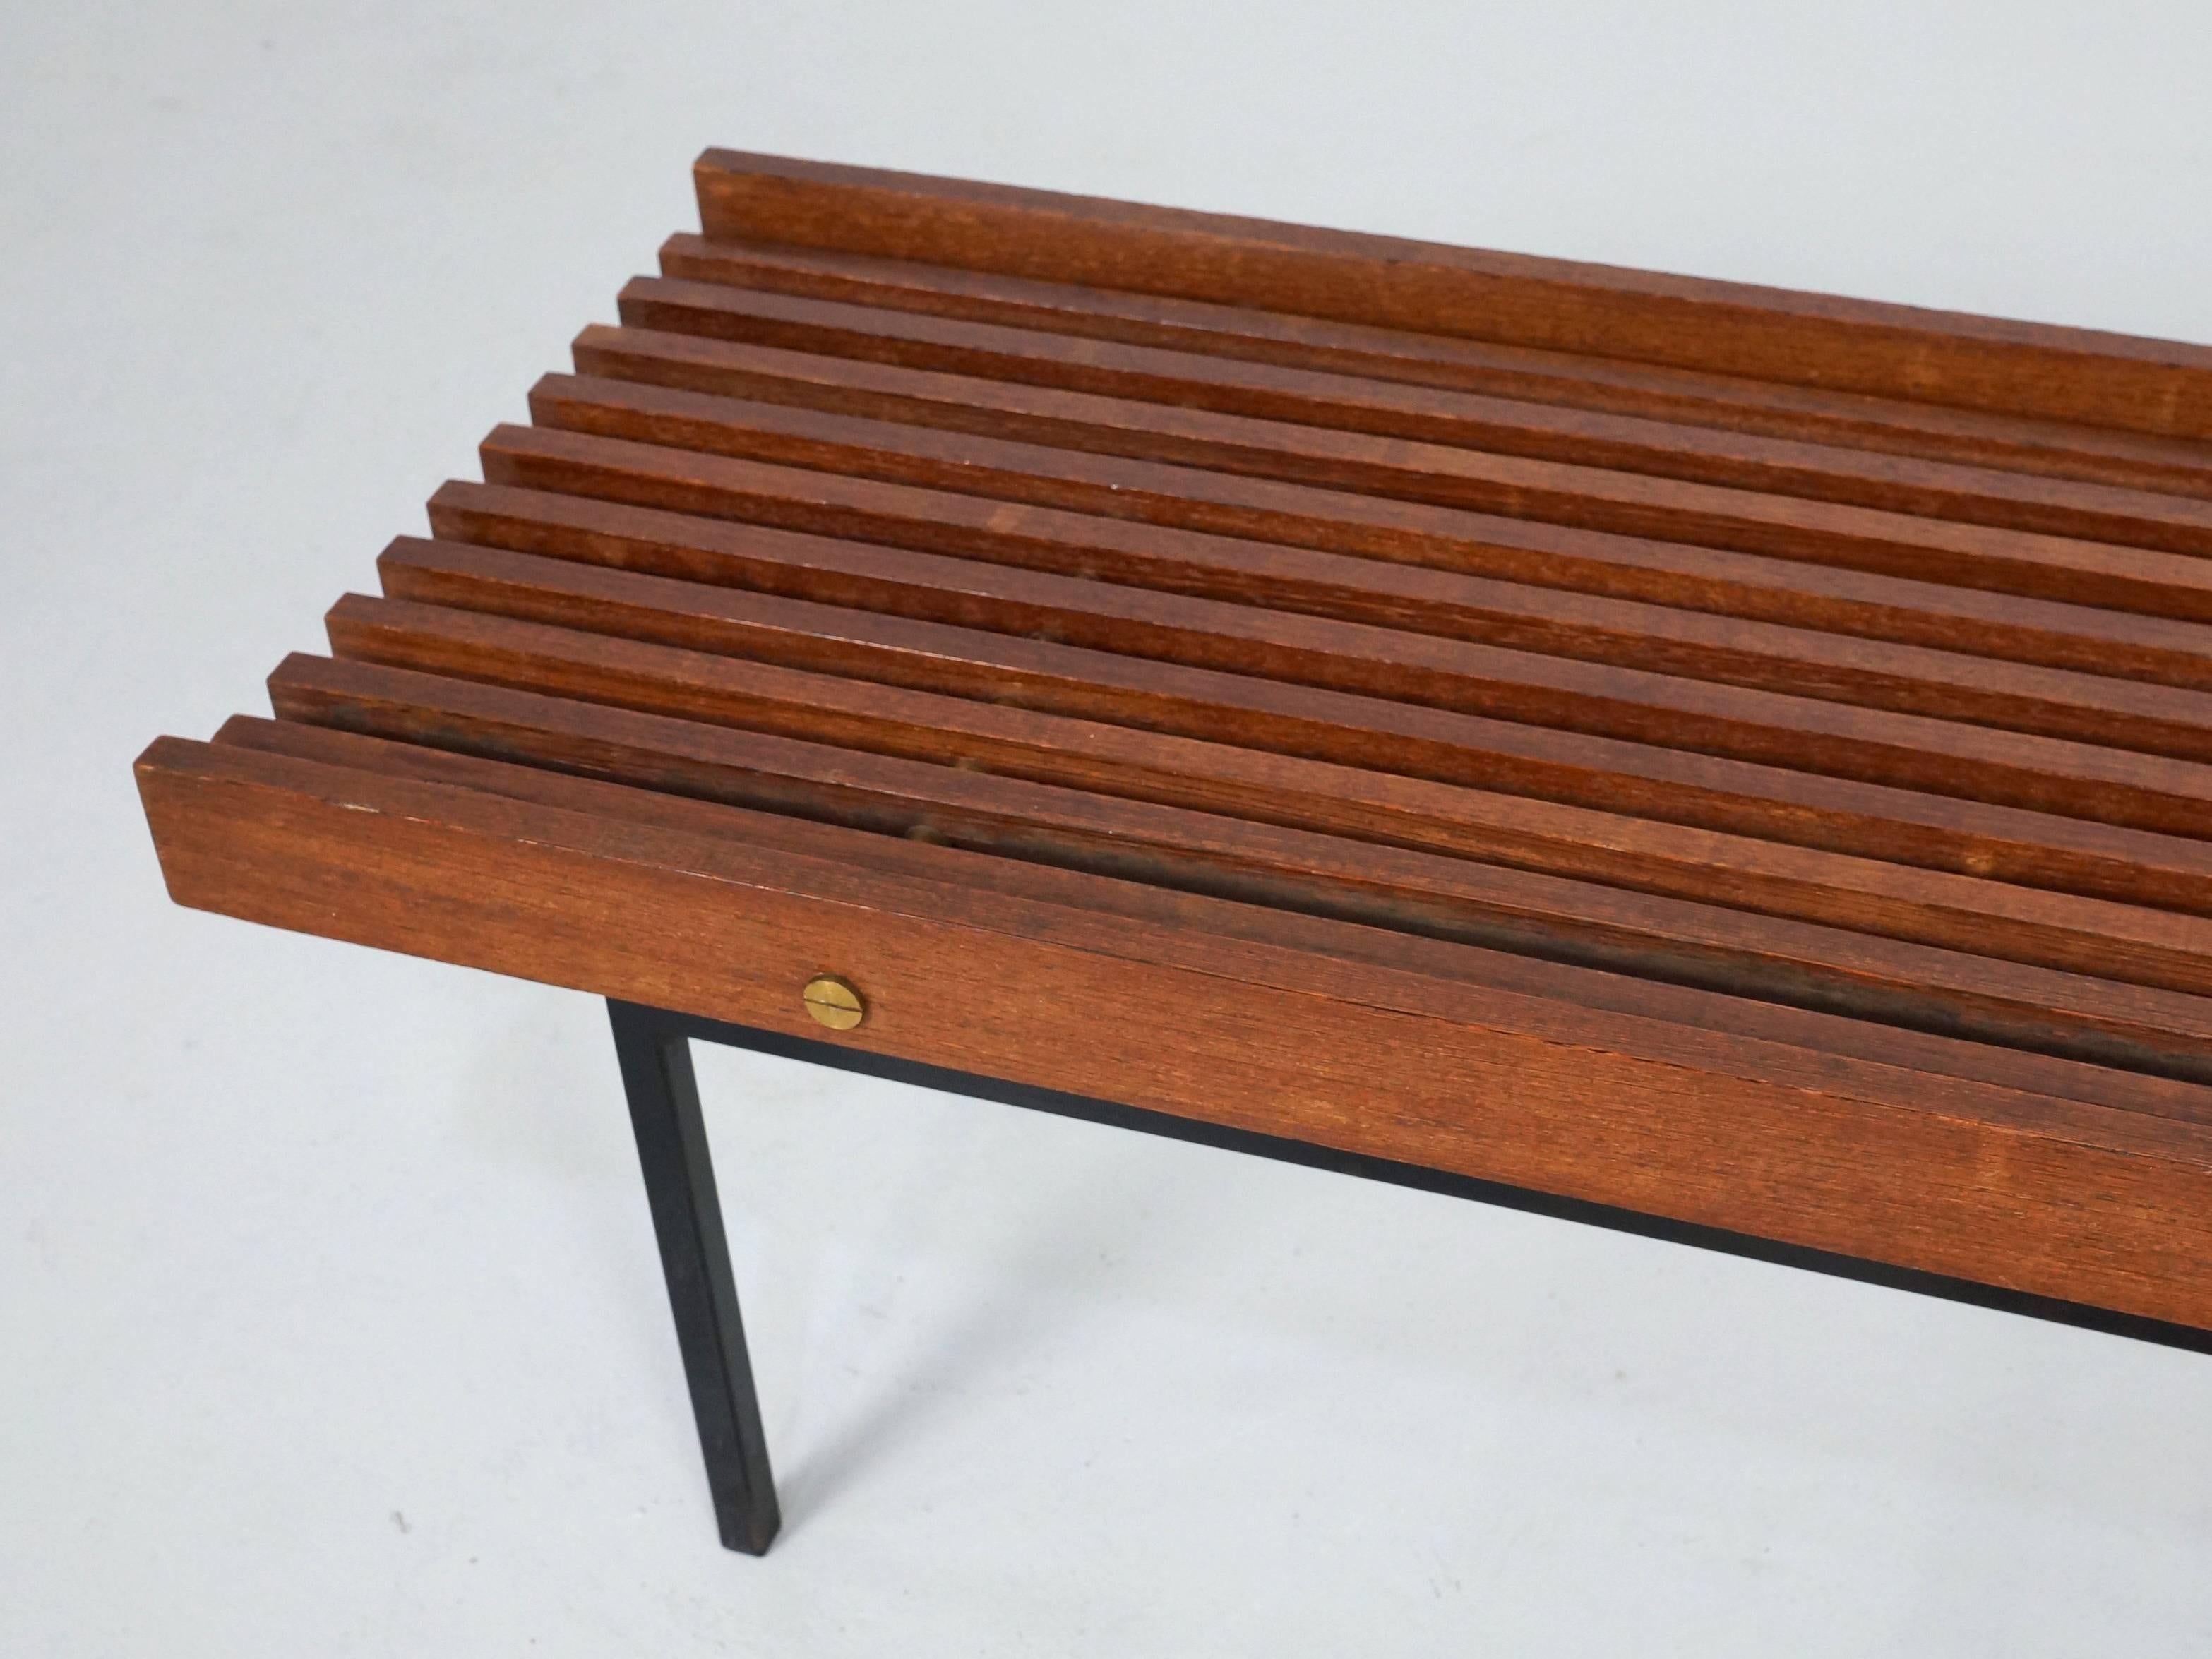 Italian Slatted Bench or Side Table in Wenge Wood, with Brass Details 2